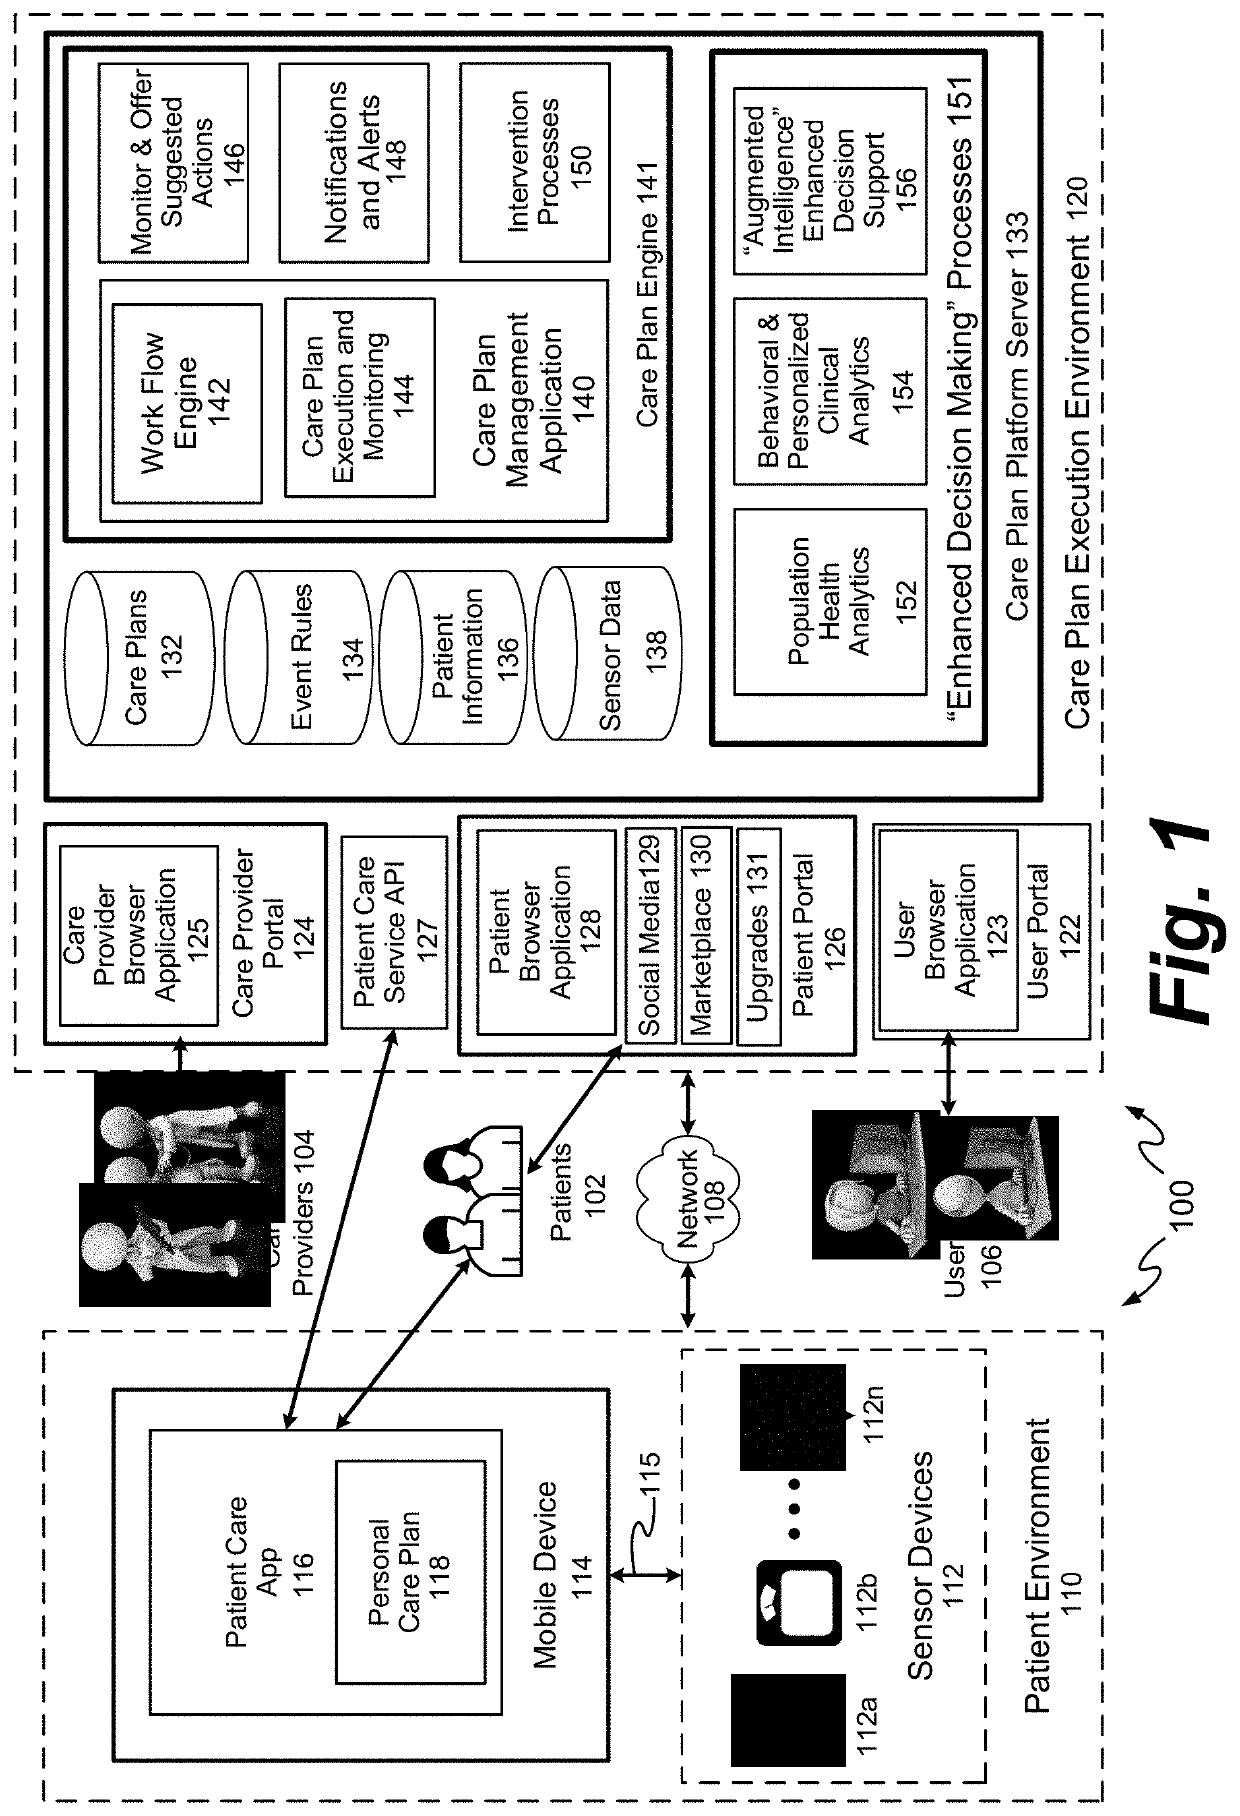 Systems and Methods for Creating and Utilizing Adaptive Care Systems